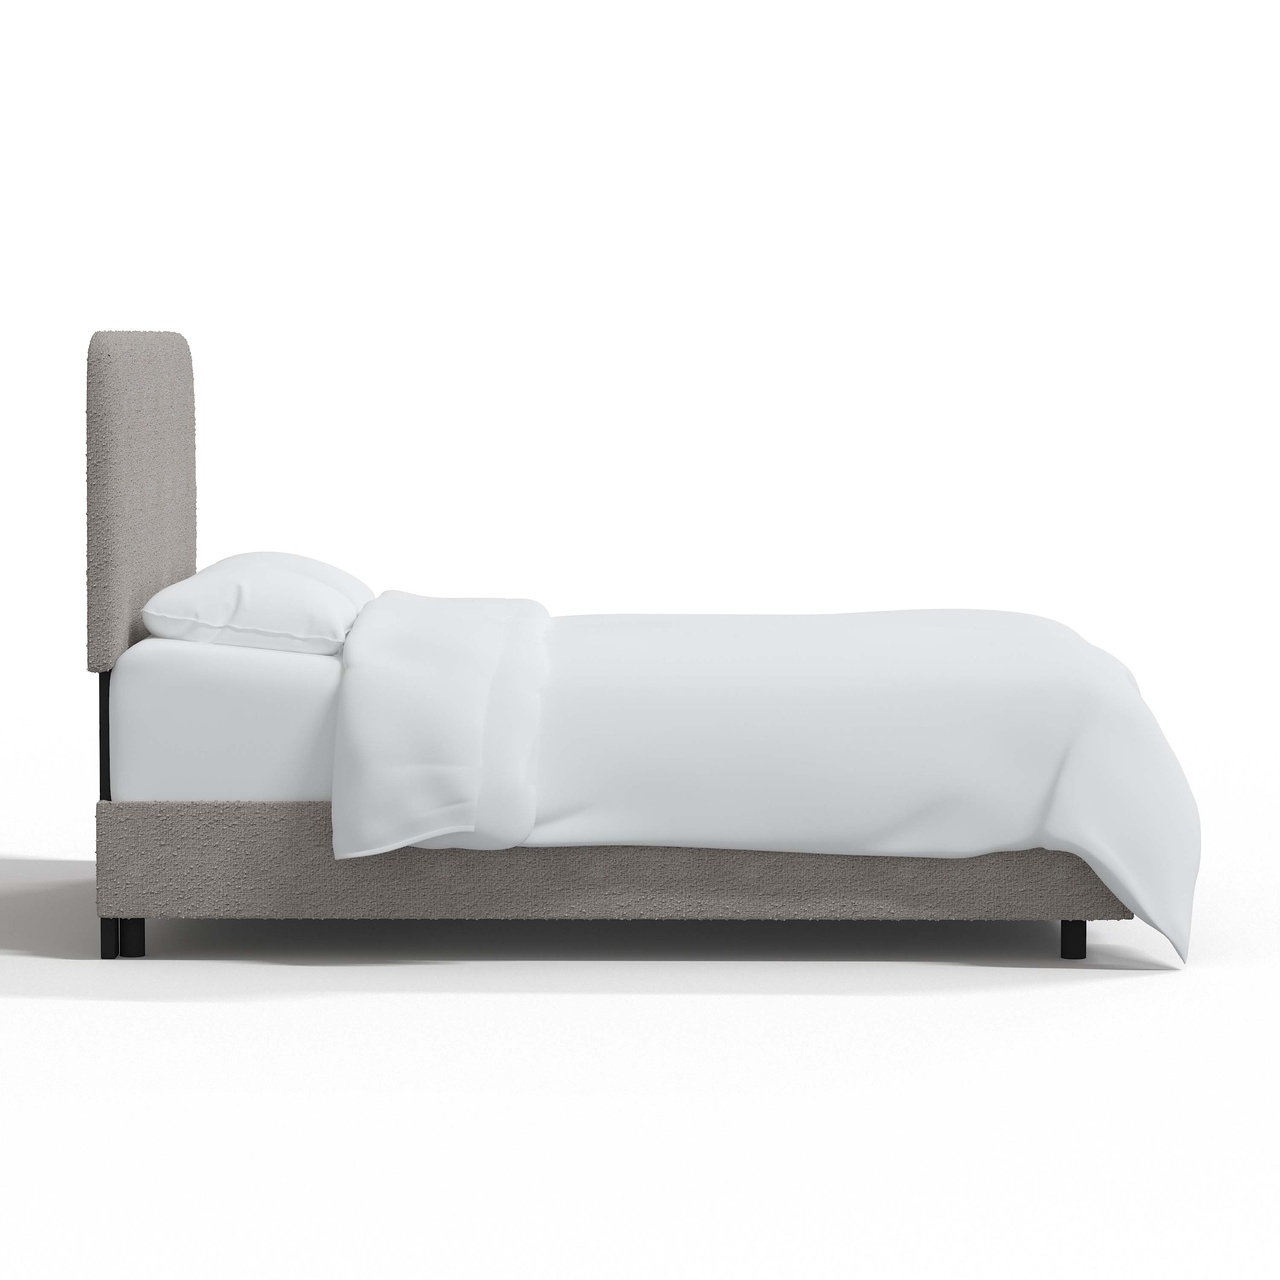 Twin Genevieve Bed - Image 2